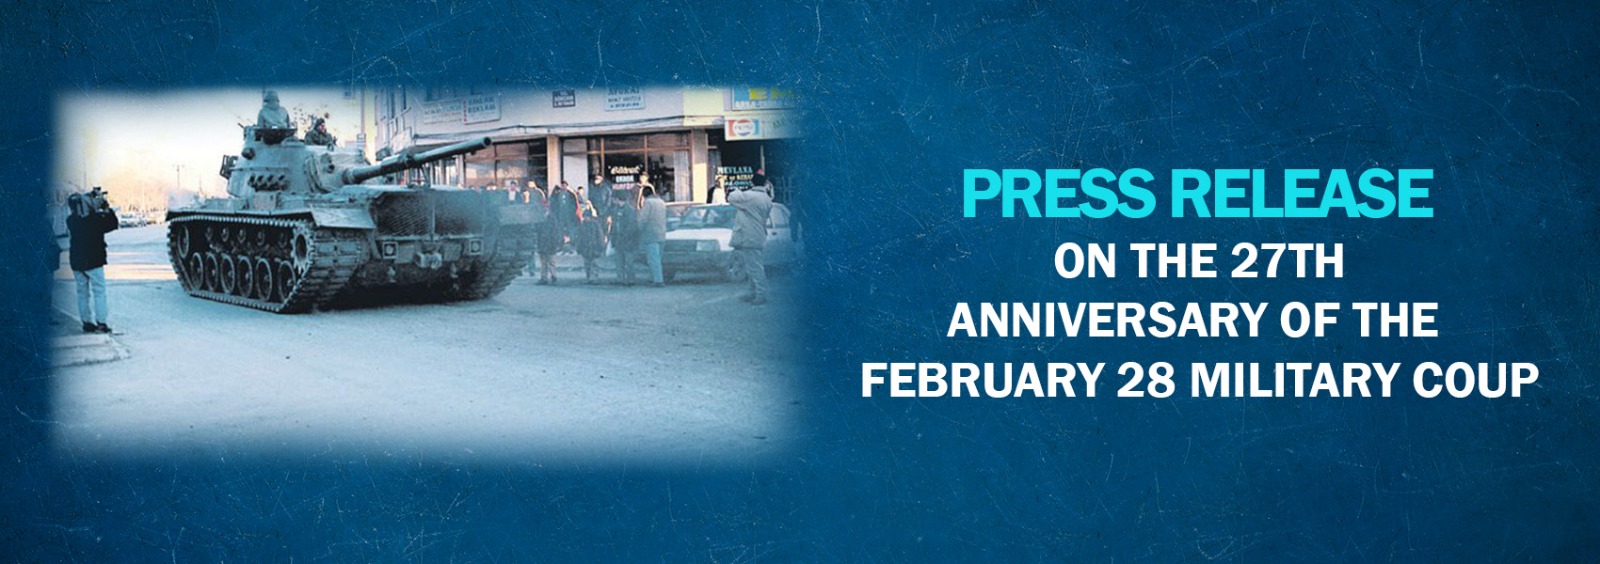 Press Release on the 27th Anniversary of the February 28 Military Coup